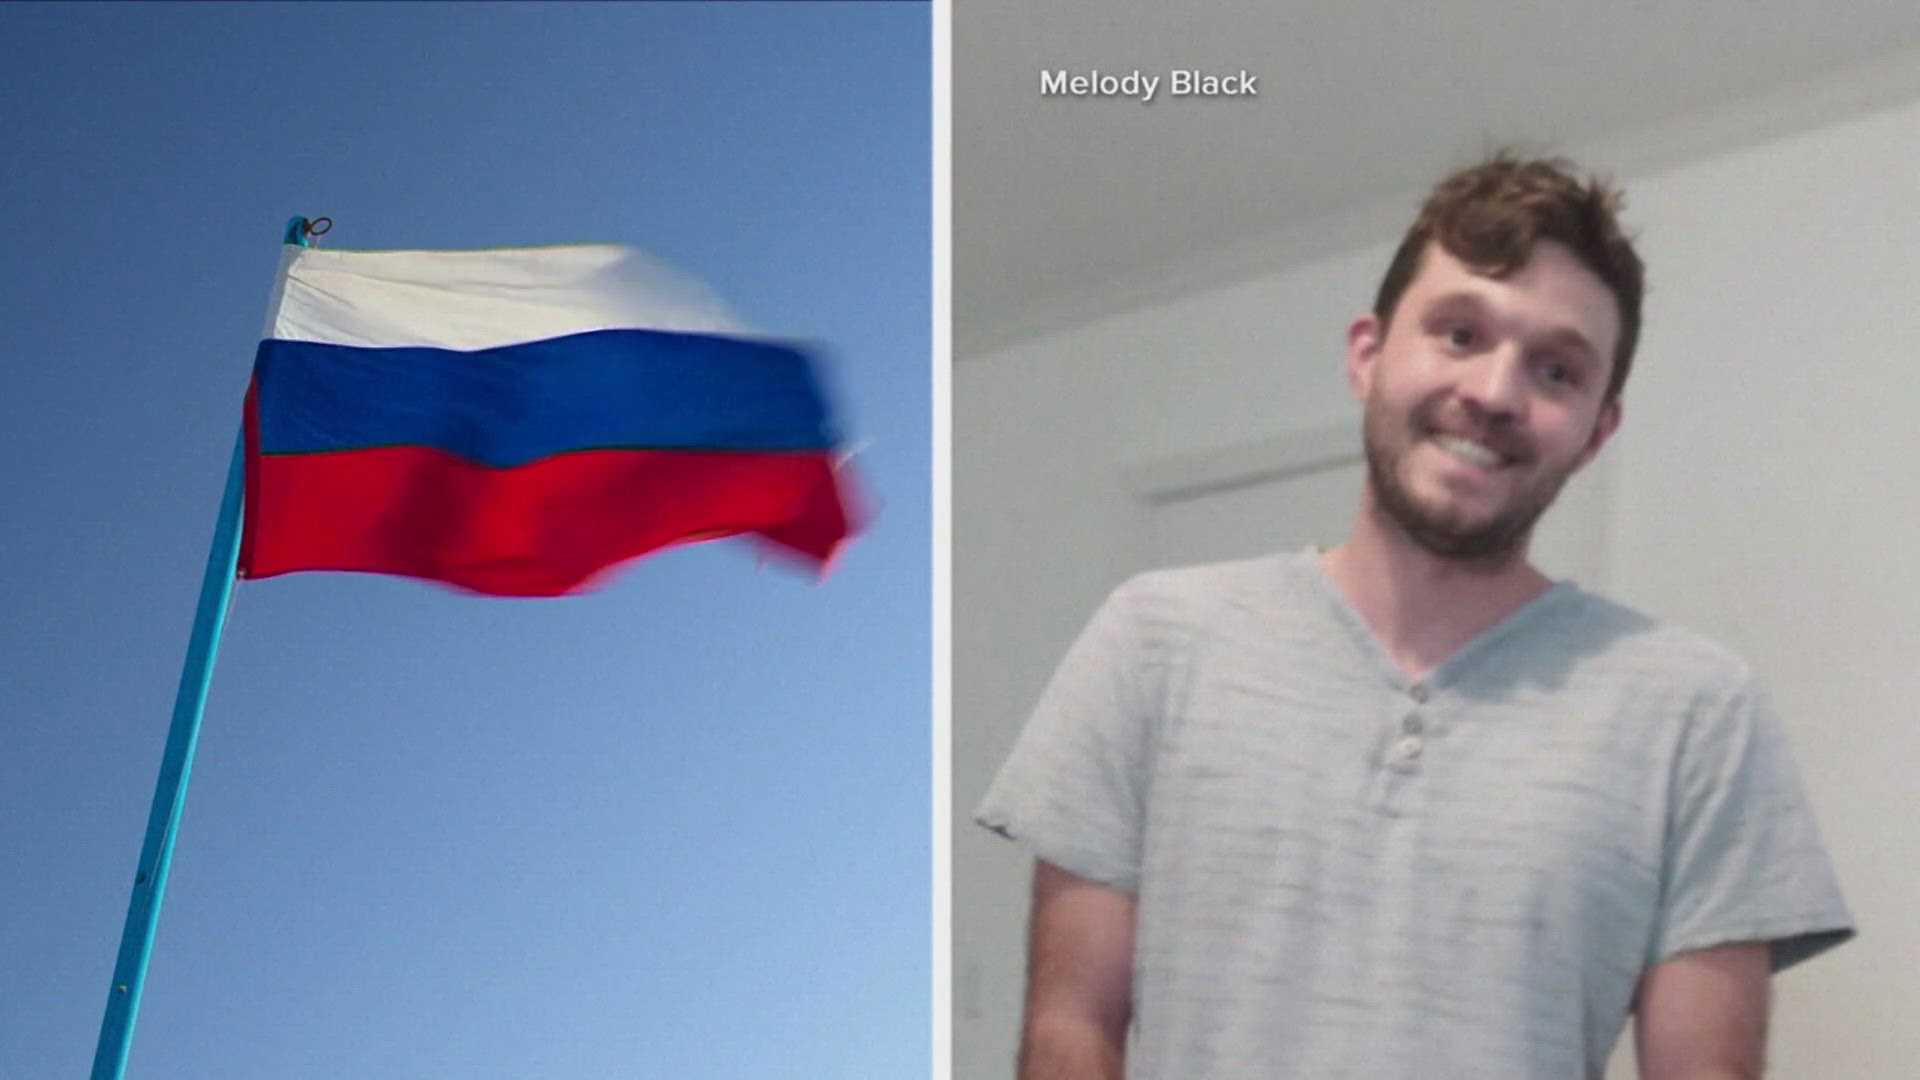 The soldier, who was stationed in South Korea, traveled to Russia on his own to visit a woman he was romantically involved with, officials said.